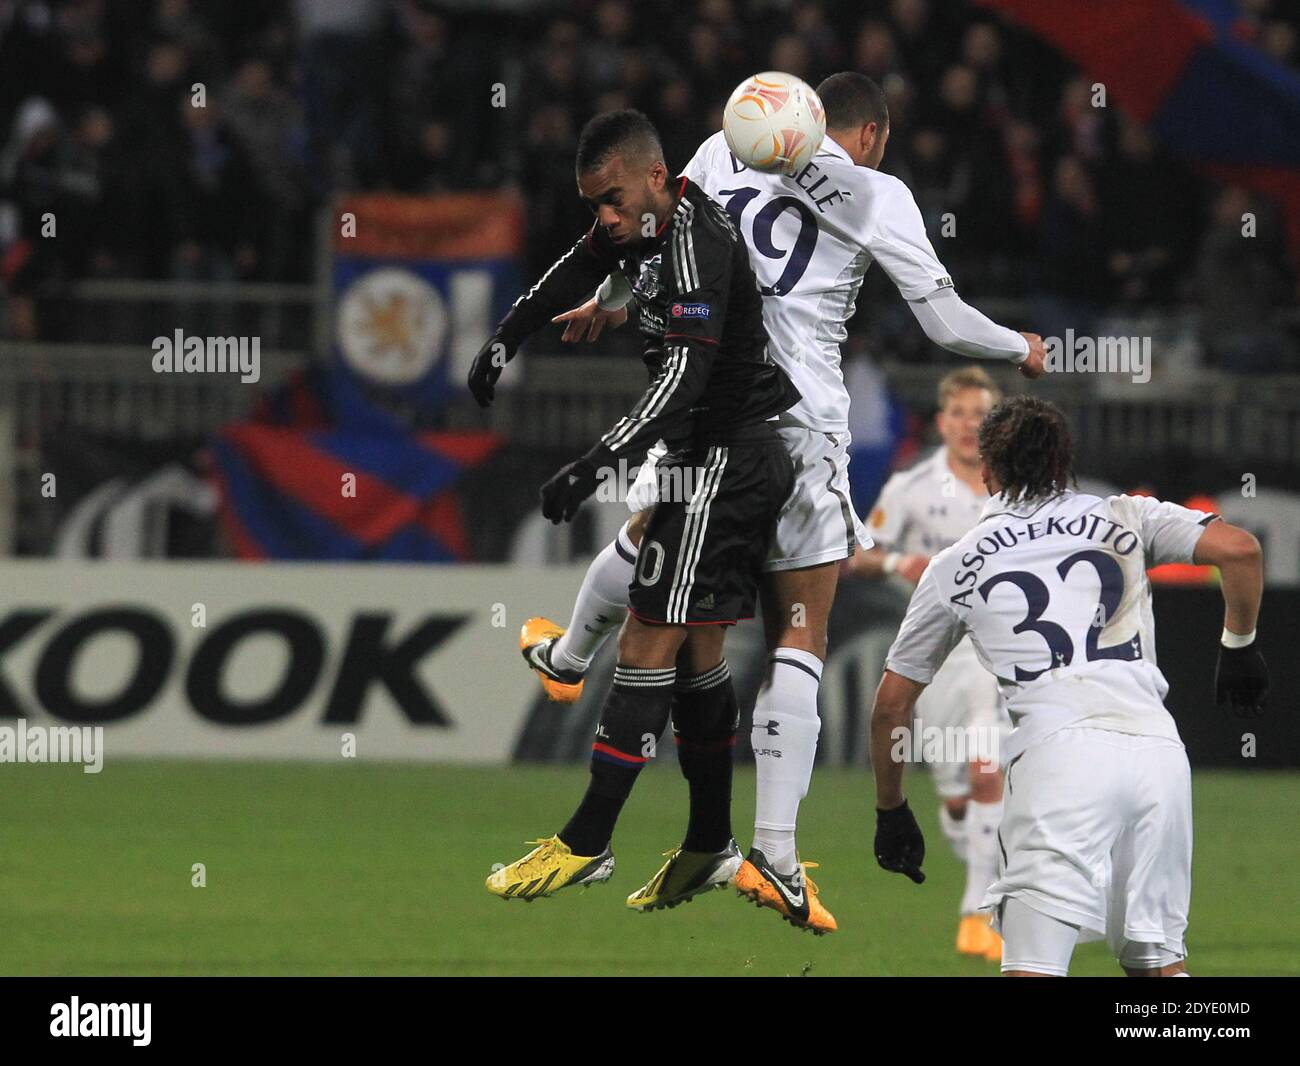 Lyon's Alexandre Lacazette and Tottenham's Moussa Dembele during the Europa League soccer match, Olympique Lyonnais Vs Tottenham Hotspur FC at the Gerland stadium in Lyon, France on February 21, 2013. The match ended in a 1-1 draw. Photo by Vincent Dargent/ABACAPRESS.COM Stock Photo